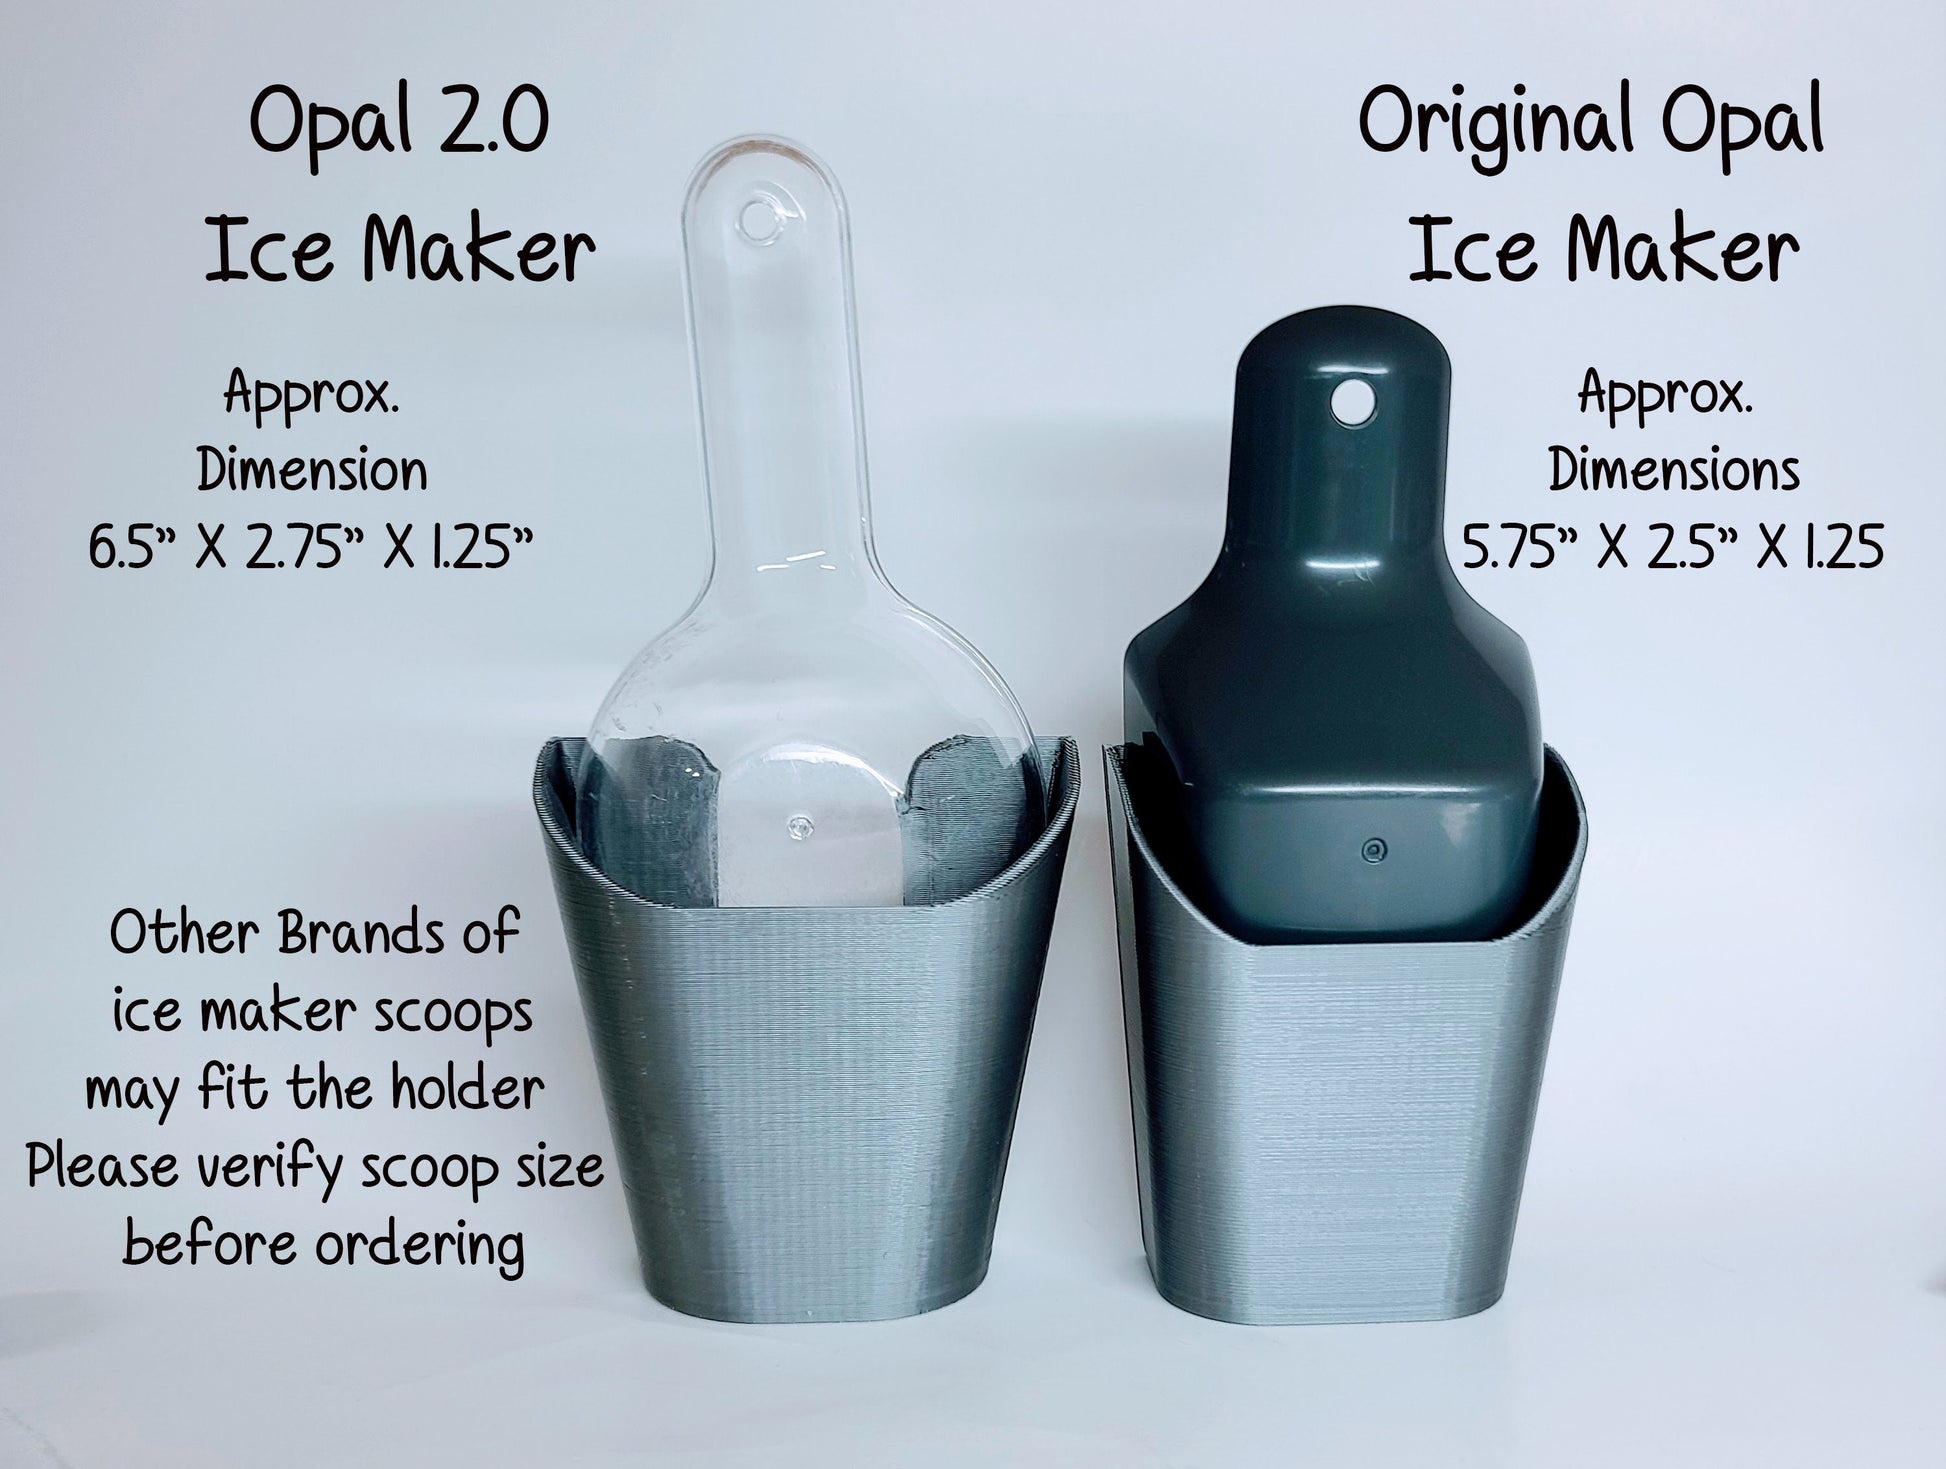 Ice Scoop Holder - Fits Opal Version 1.0 or 2.0 Ice Makers | Gevi * Does  Not Include Ice Maker or Scoop*